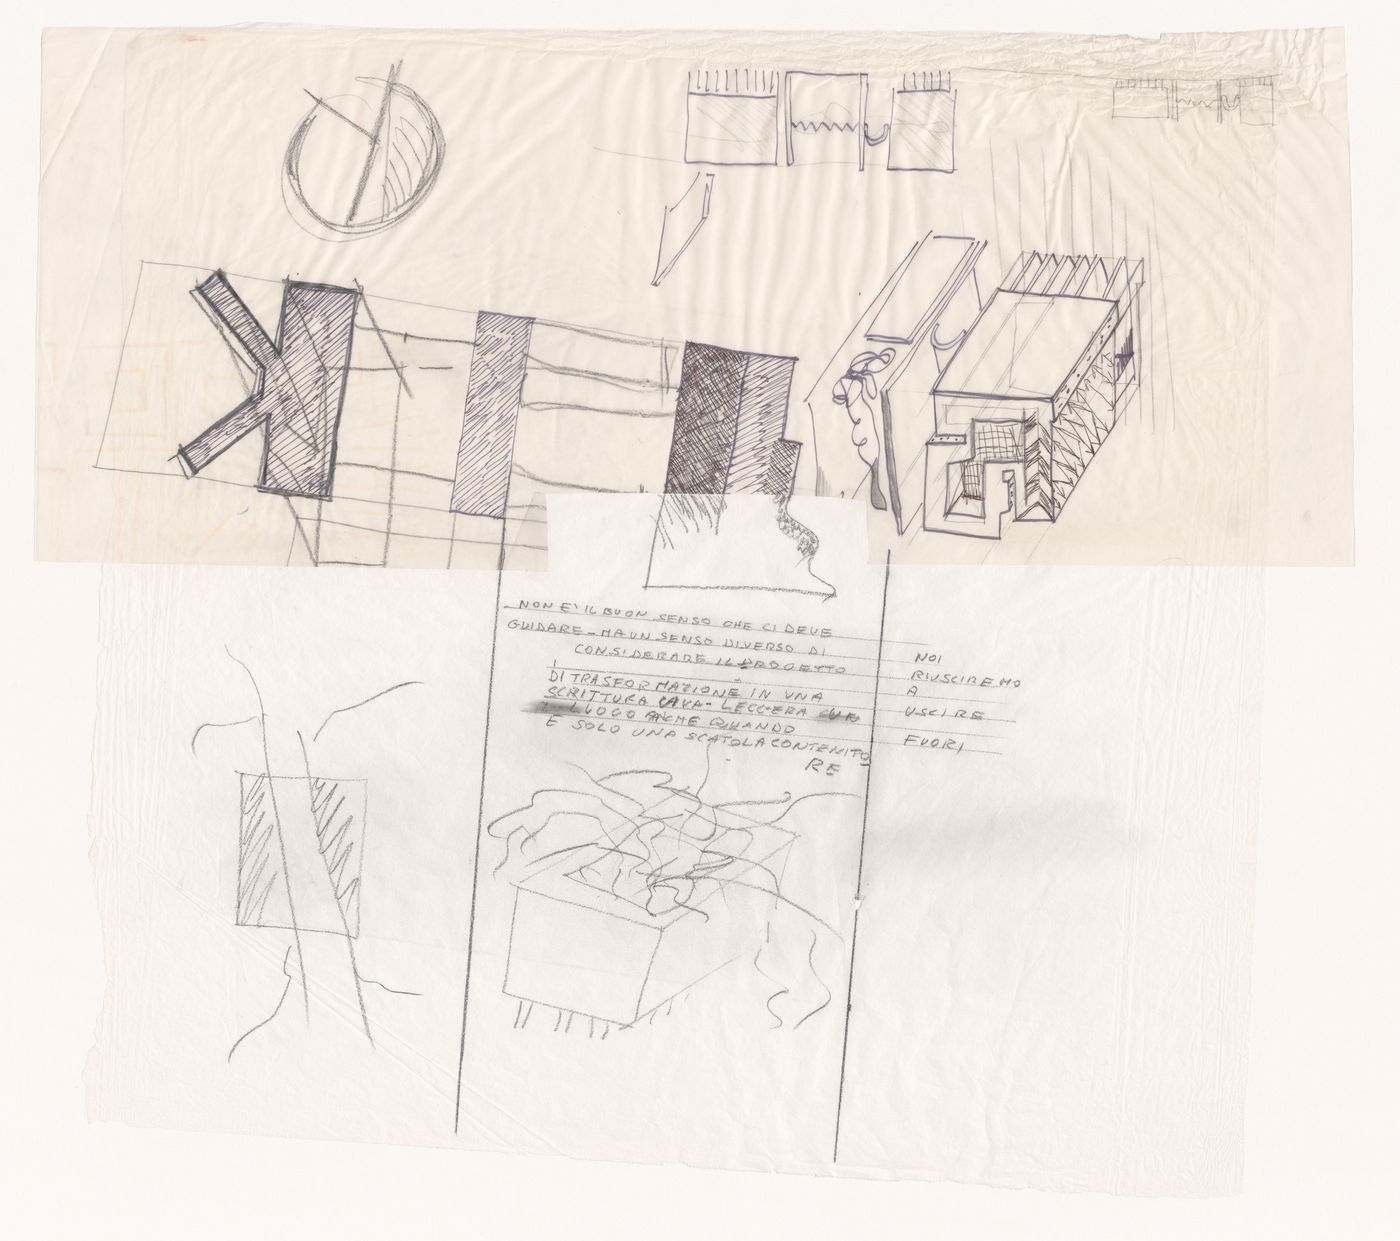 Sketches and notes for Prison project